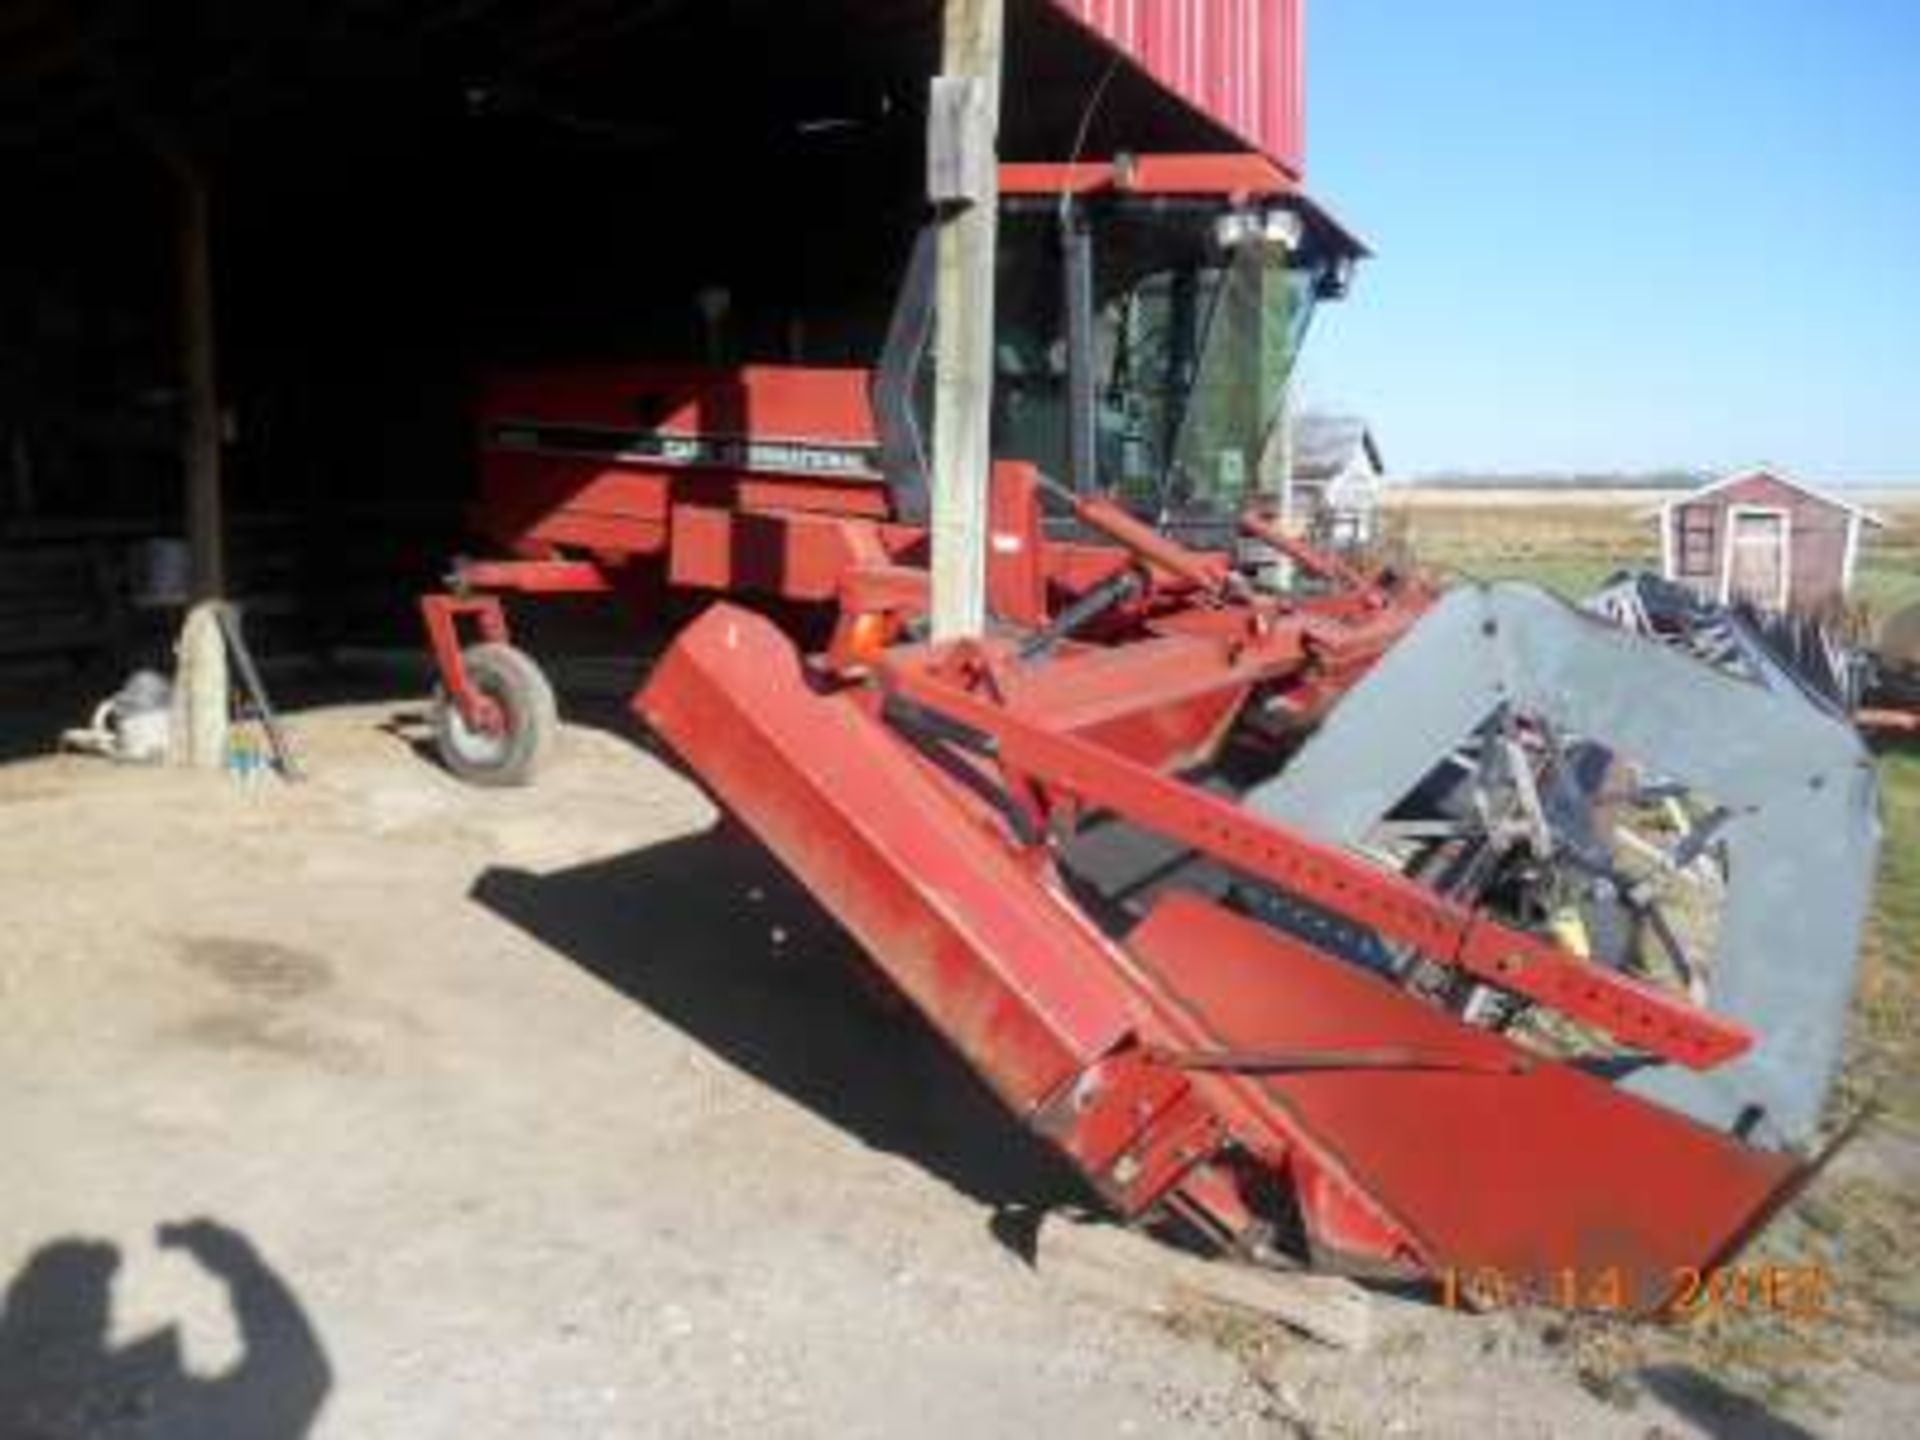 1995 Case IH SP 8820 Swather: diesel, 25ft shifting table, pick up reel, 2900 hours – real nice